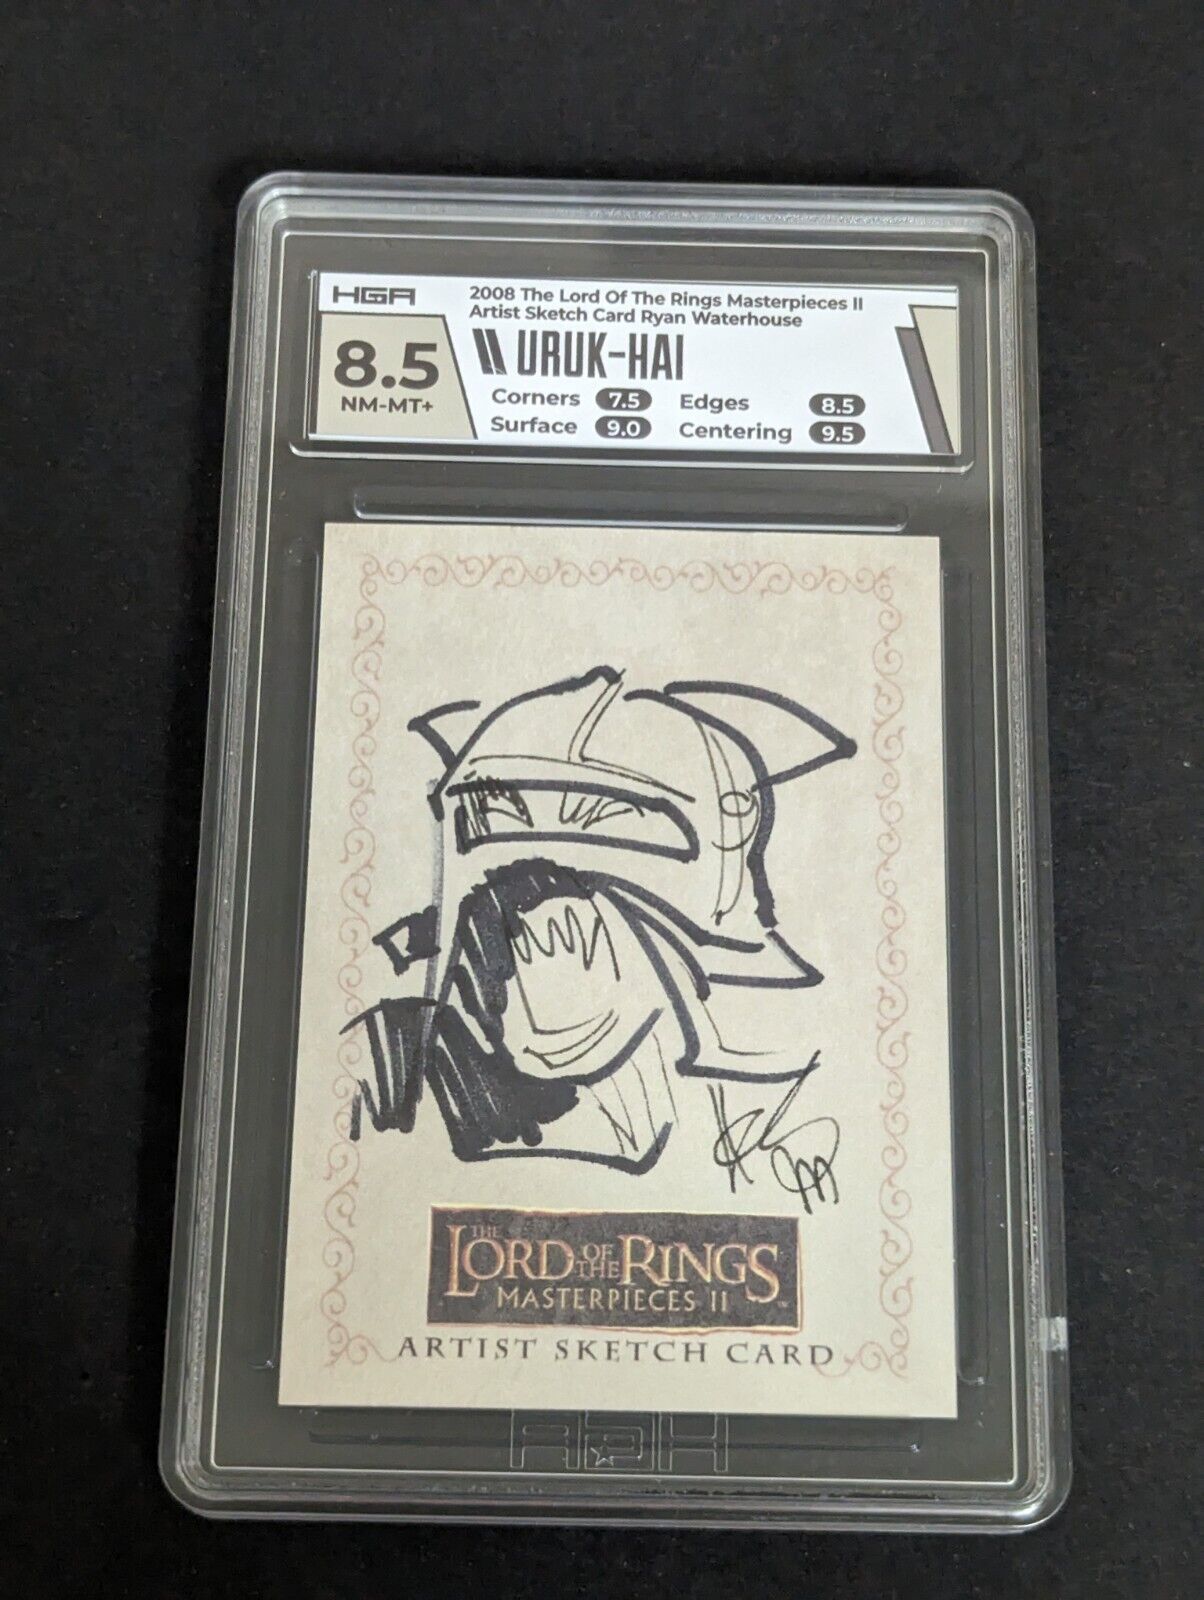 Topps Lord Of The Rings LOTR MASTERPIECES 2 Sketch Card 1/1 Uruk-hai HGA 8.5 